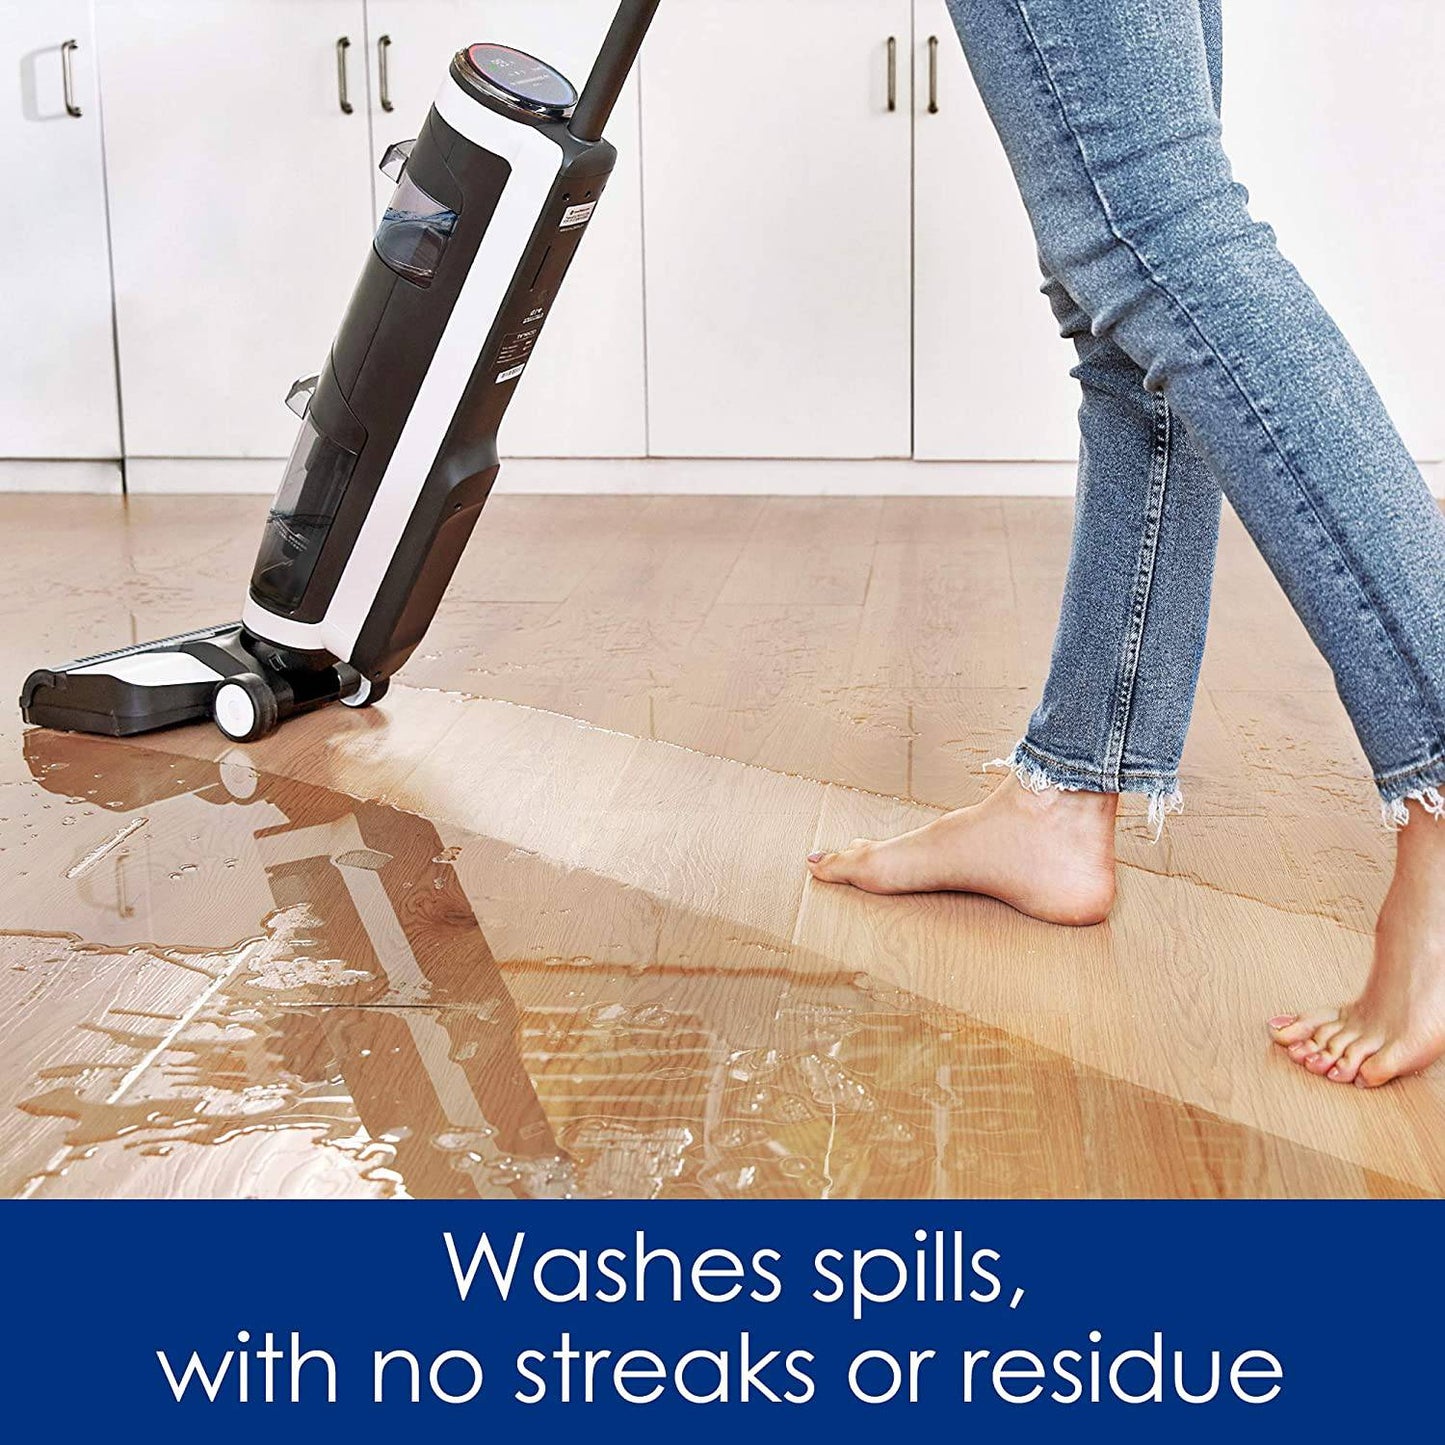 COOLBABY ZZR-XDJ Floor Cleaner, Wet and Dry Vacuum Cleaner - COOLBABY